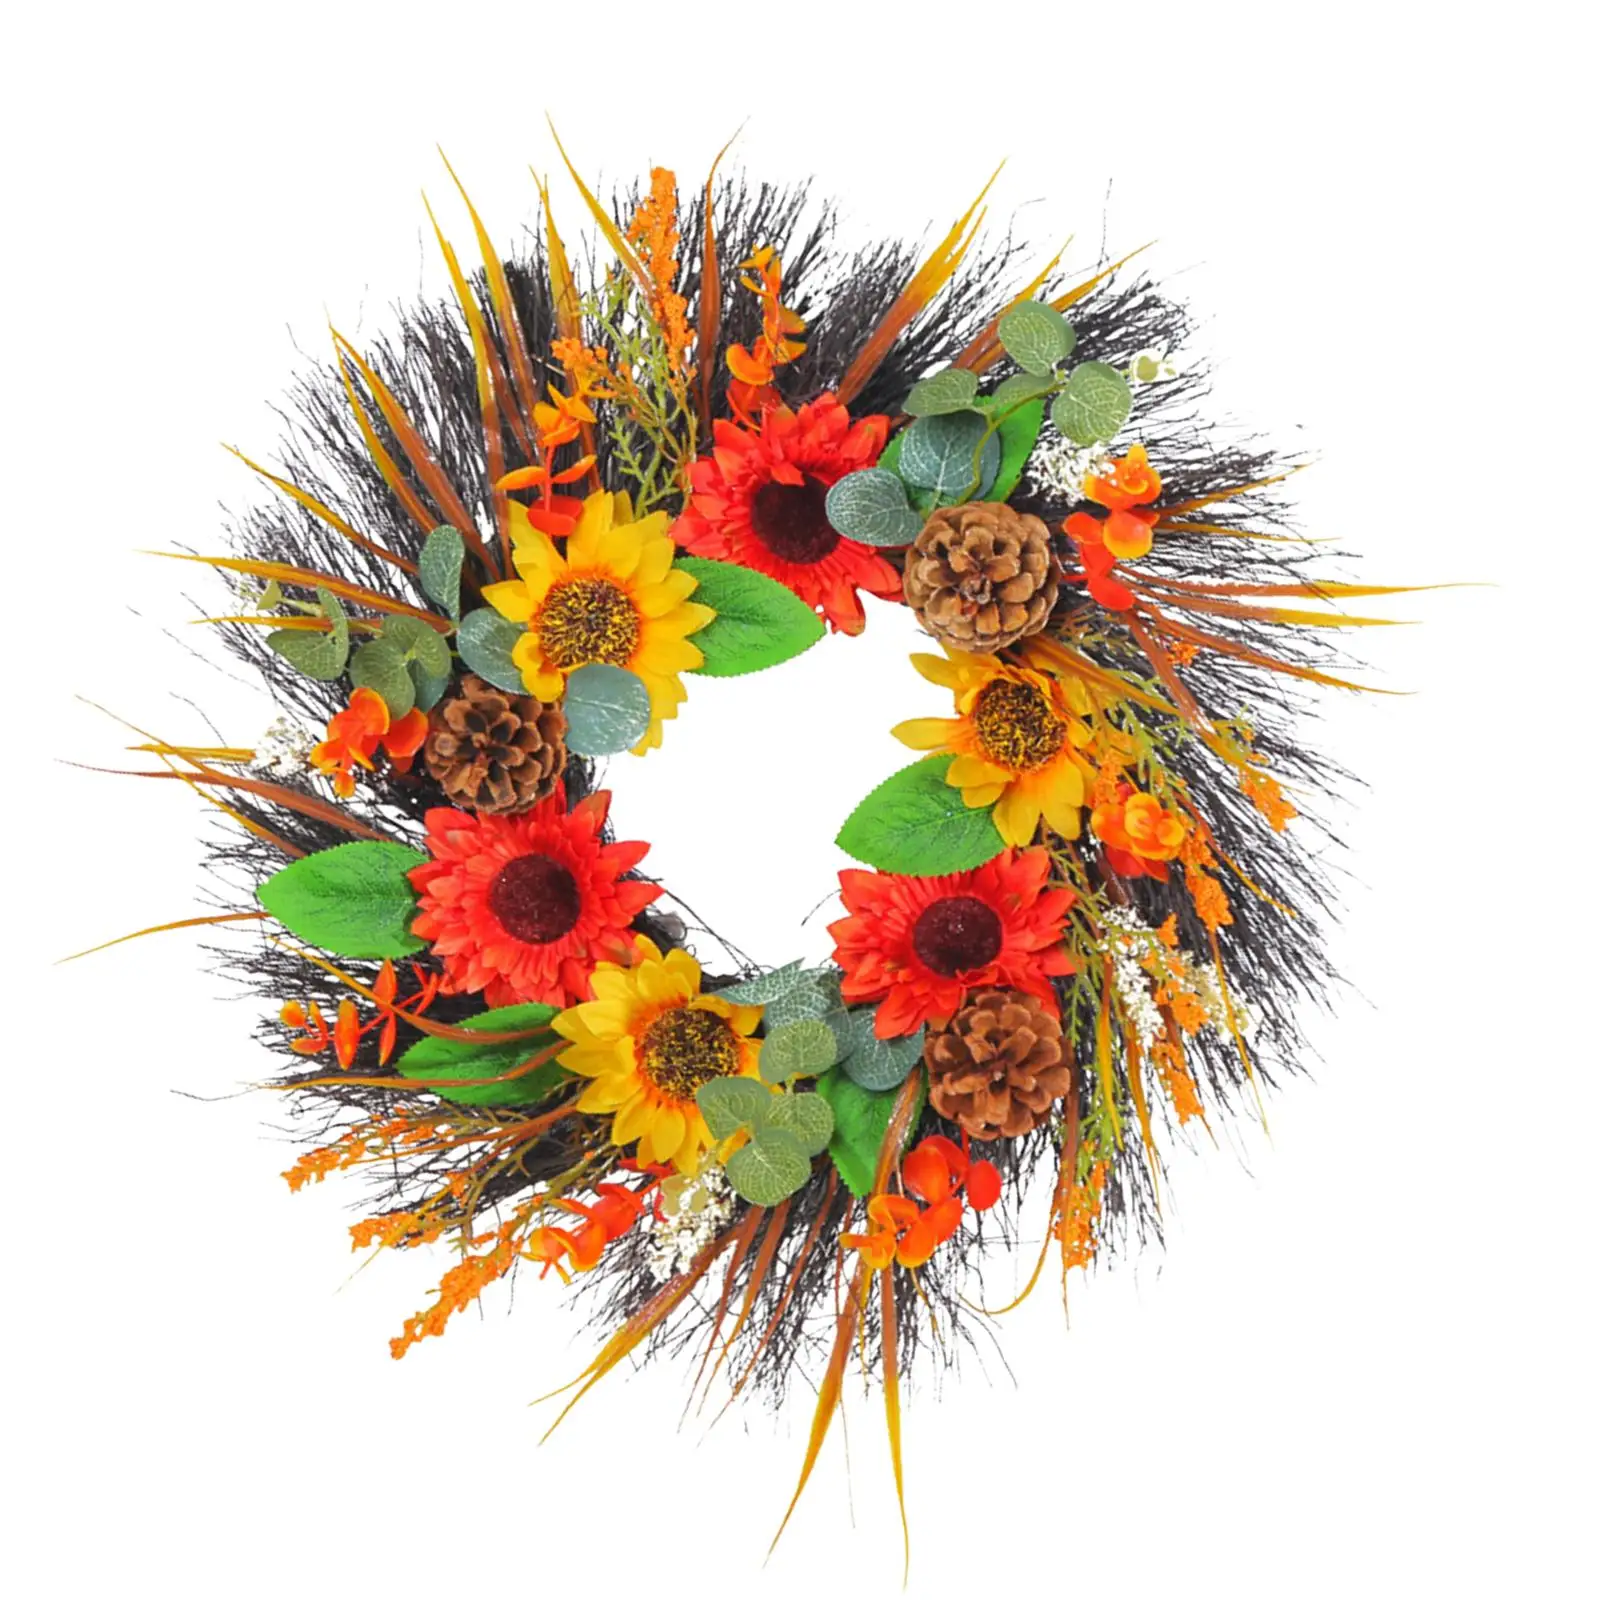 Artificial Flower Wreath Hanging Ornament 40cm Greenery Leaves Sunflower Wreath for Fireplace Backdrop Porch Holiday Home